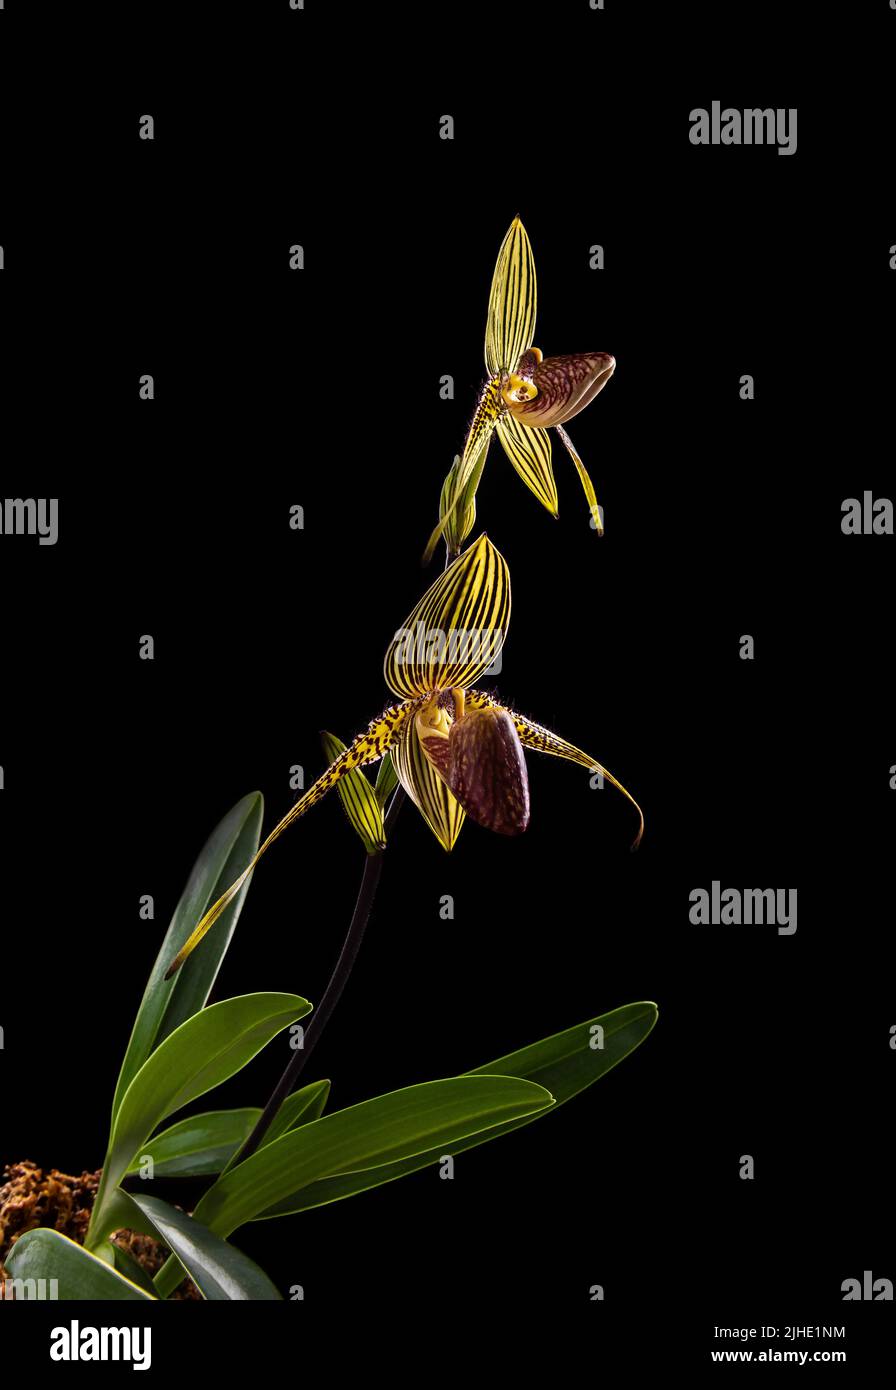 Paphiopedilum rothschildianum orchid specie in bloom. Side view. Black background. Two flowers. Endangered terrestial and lithophyte orchid, endemic t Stock Photo